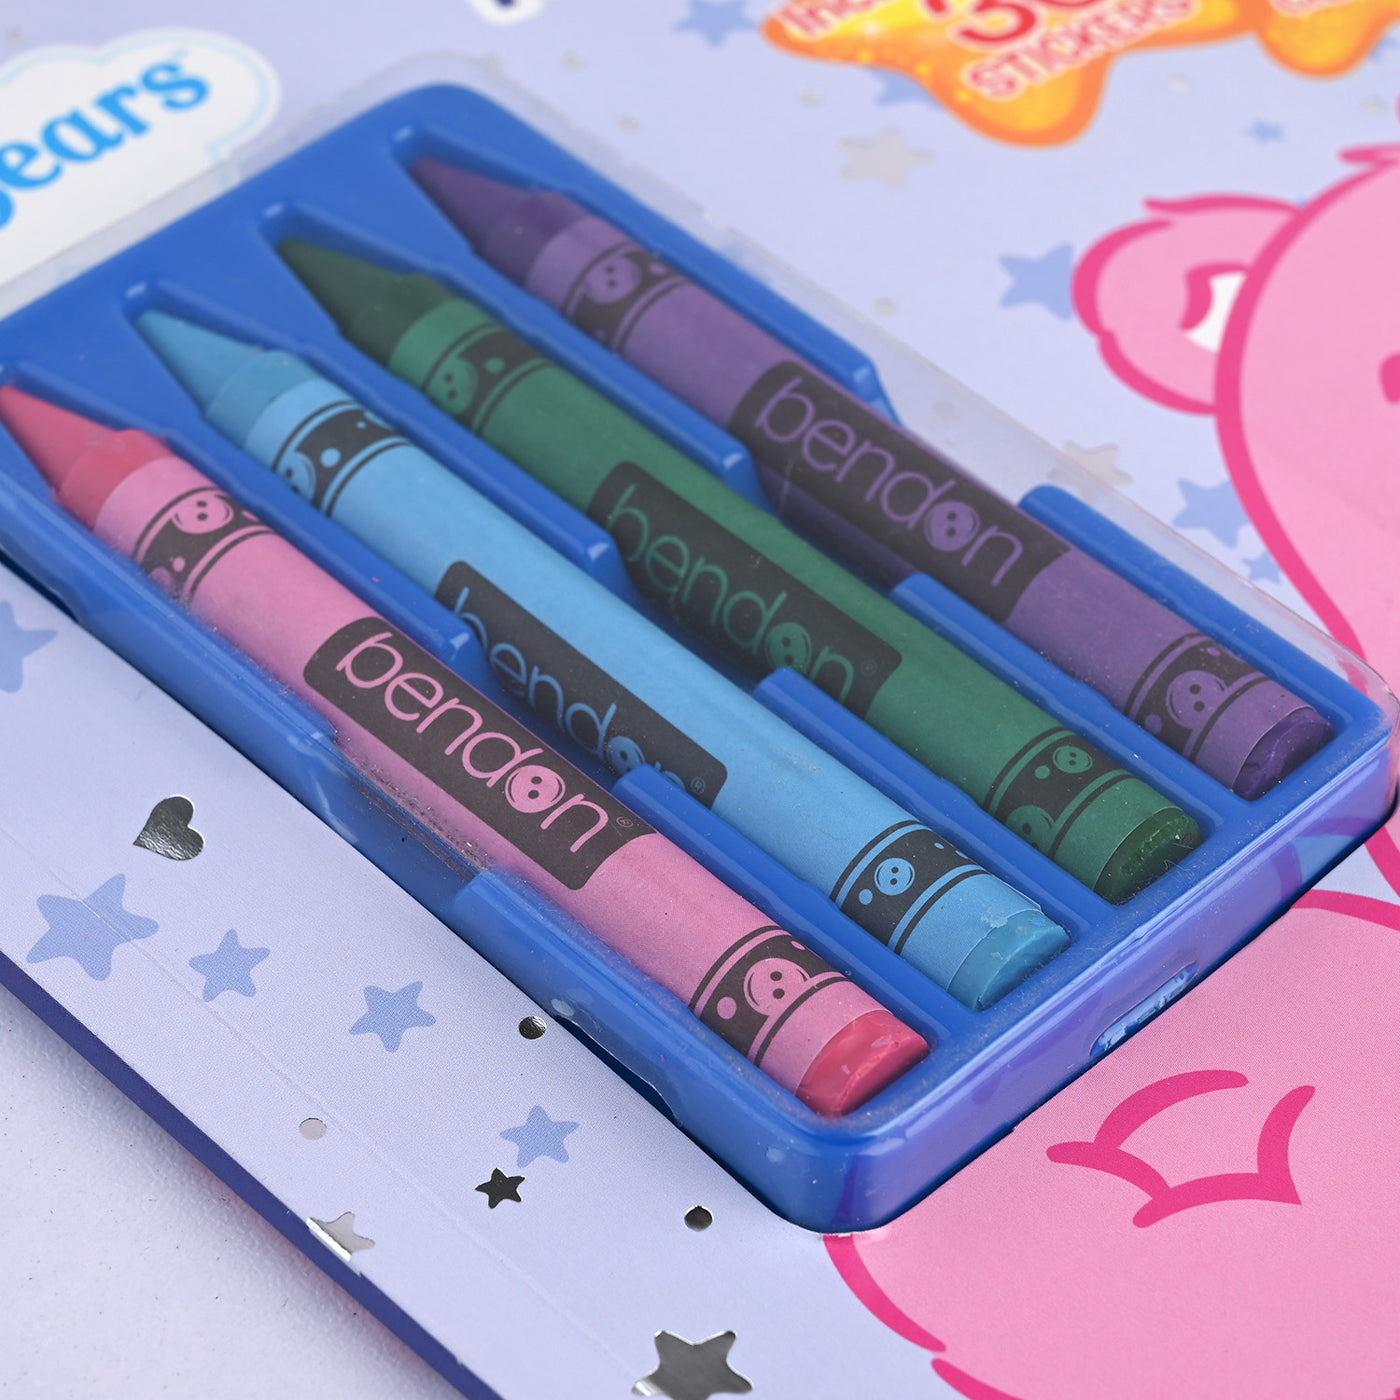 Care Bears Crayons Coloring Sticker Book